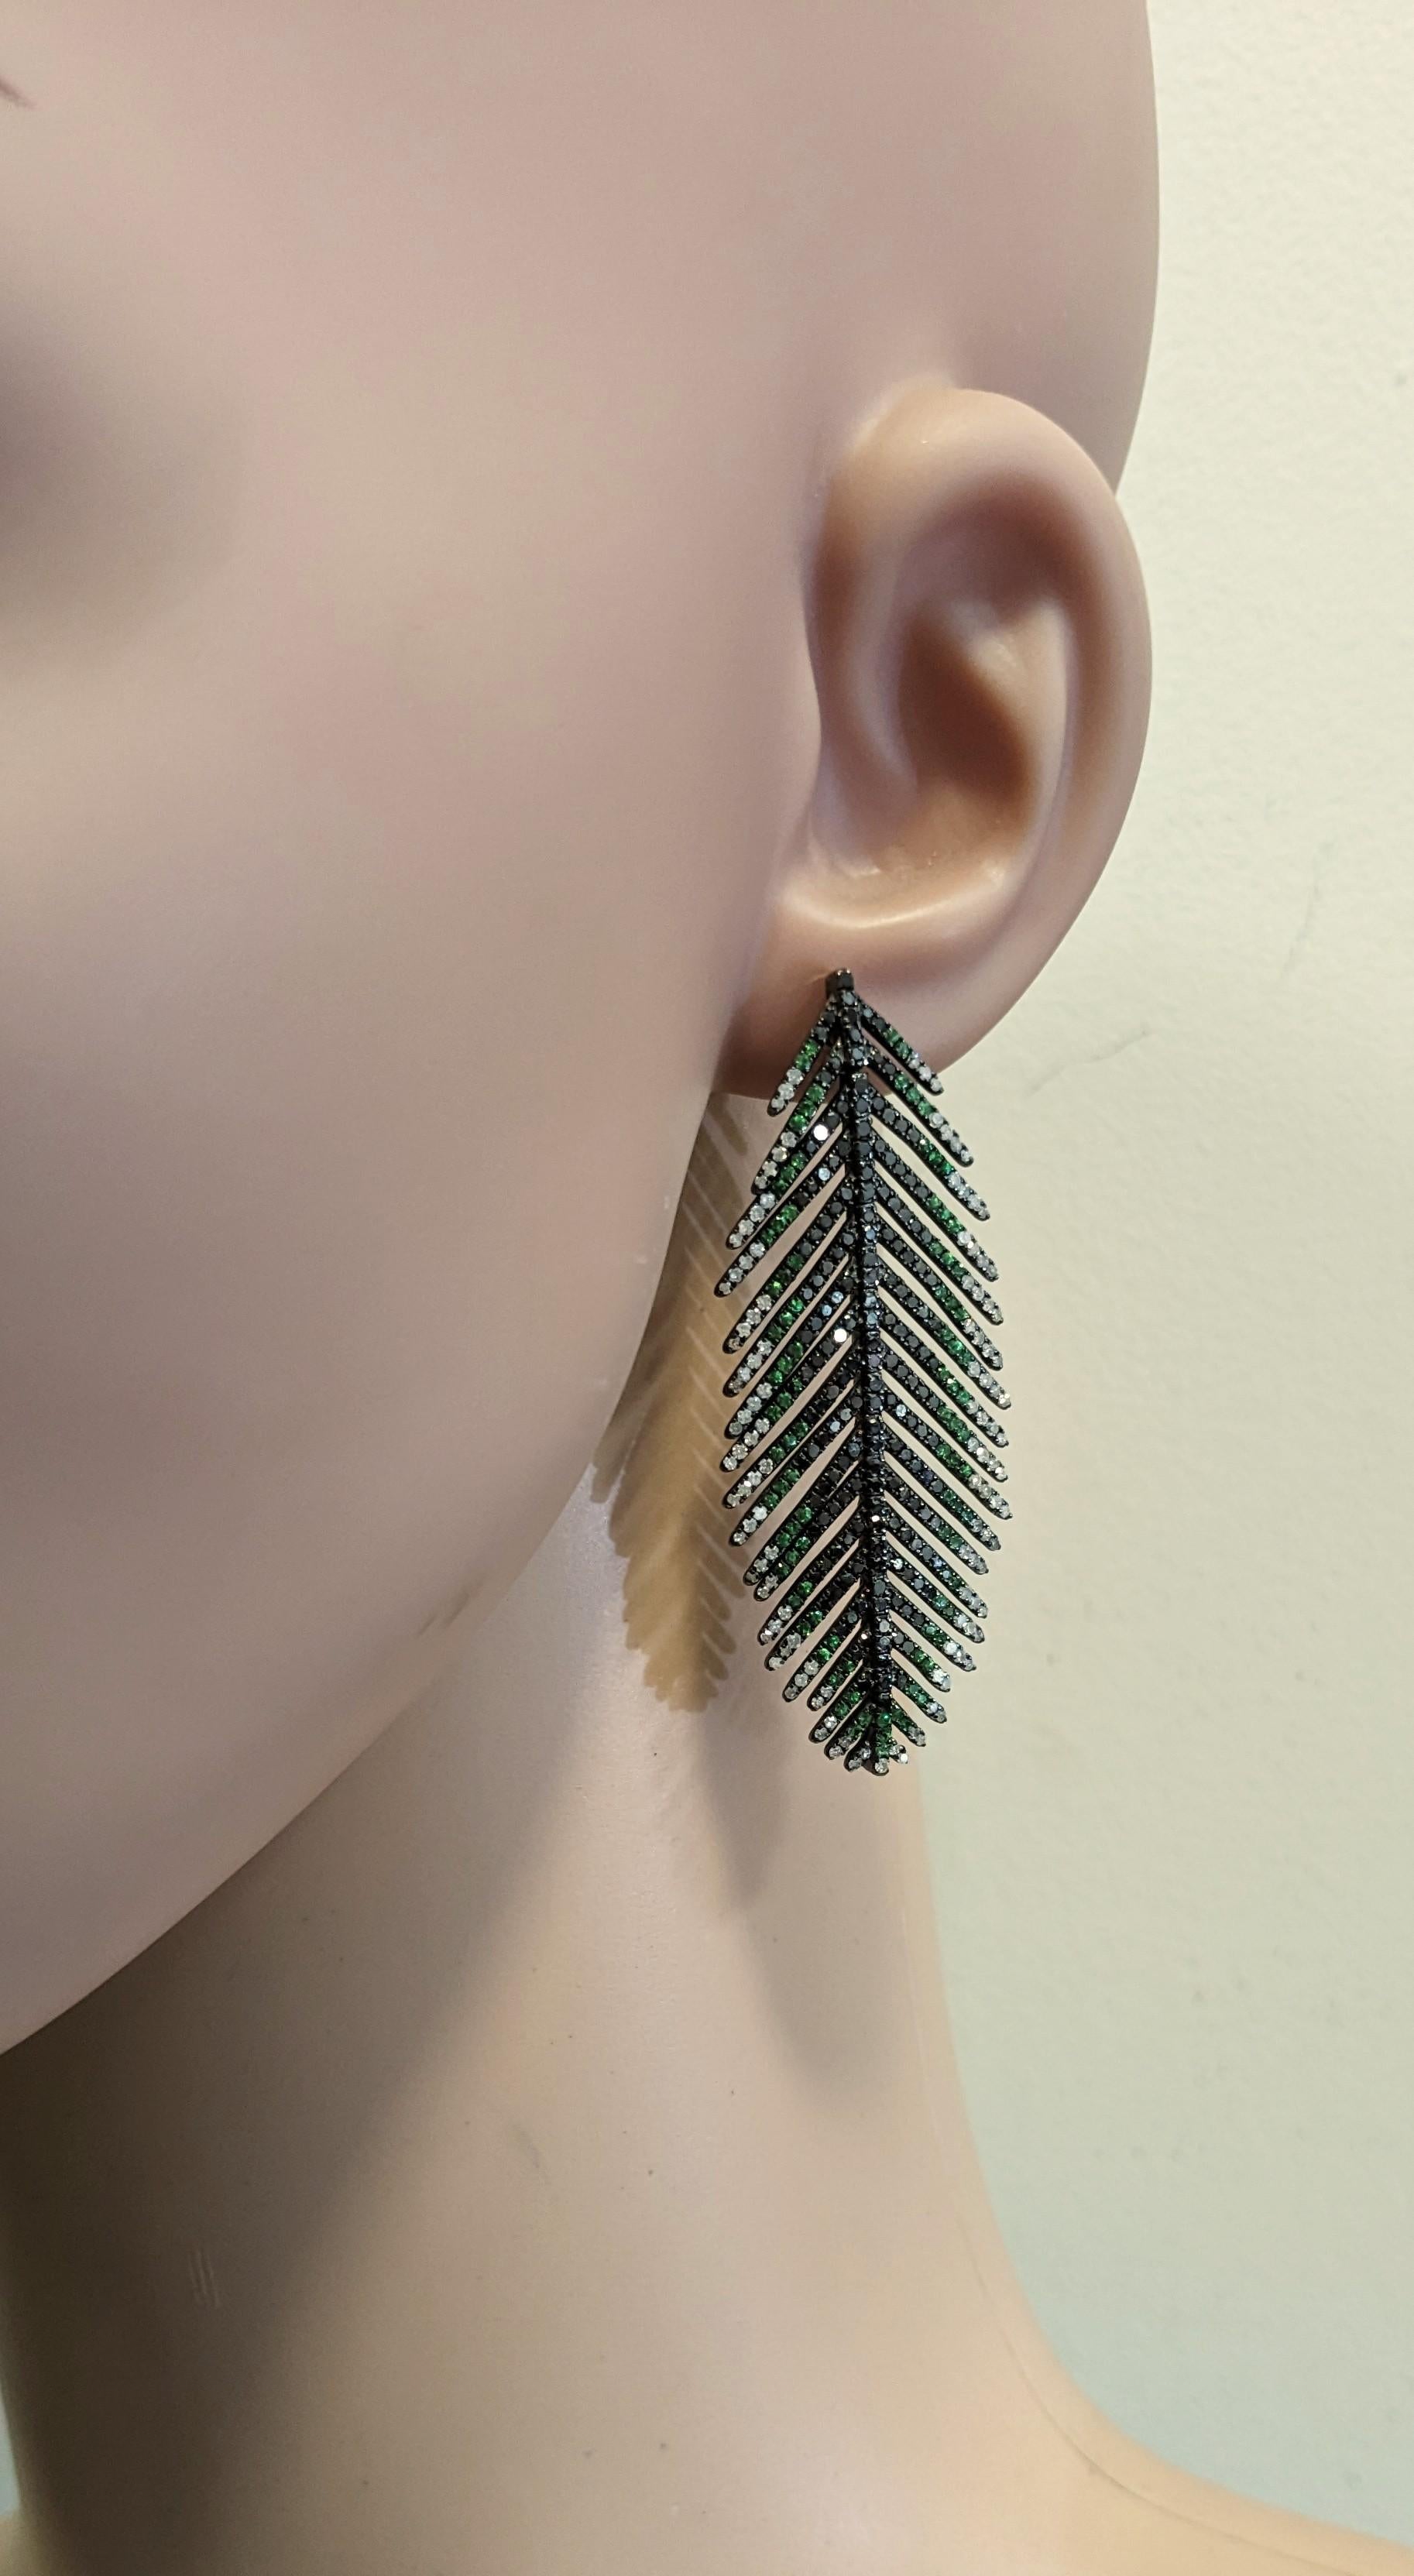 Brilliant Cut Feather Earrings in 18k  Gold, Silver, Diamonds and Tsavorites For Sale